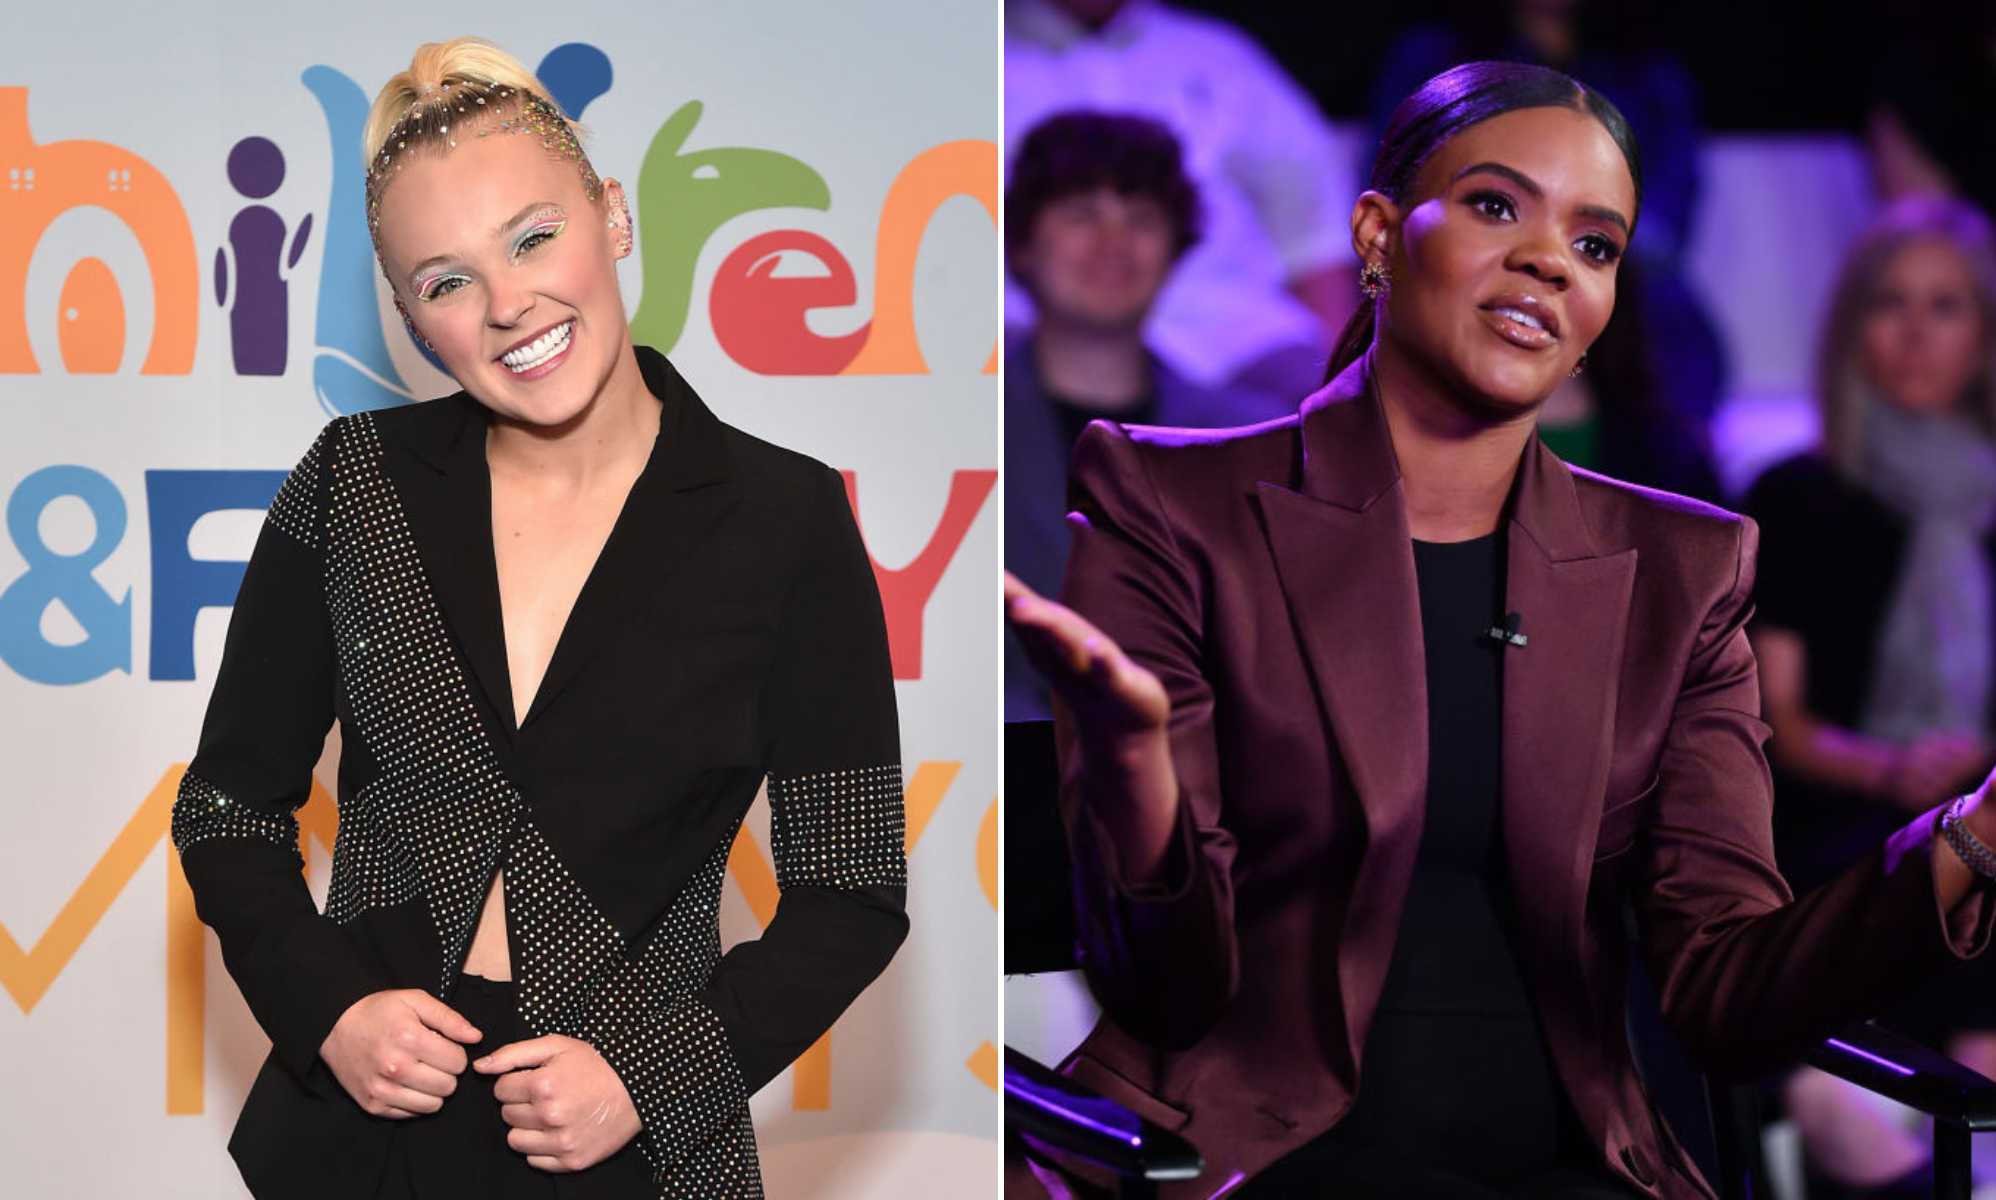 JoJo Siwa claps back at far-right commentator Candace Owens